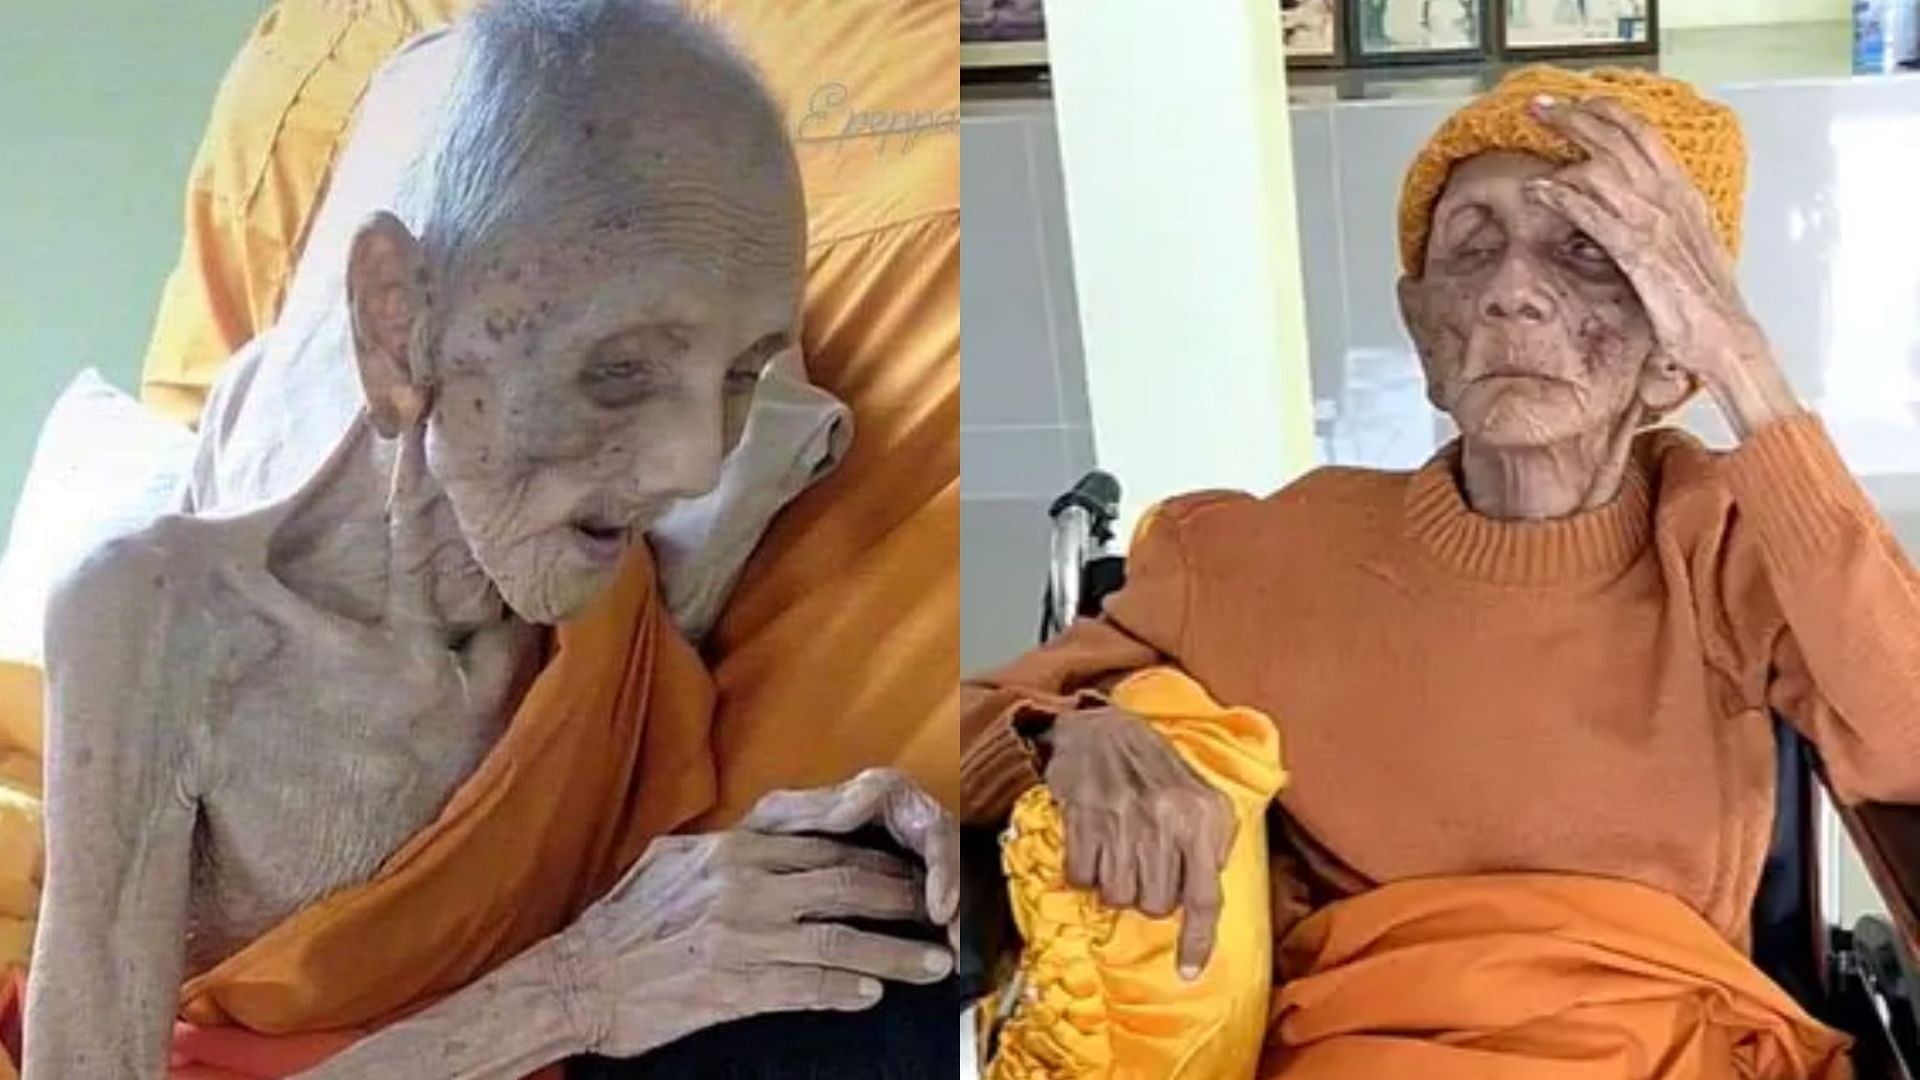 Photos of a man who has been rumored to be a 209 year old Tibetan monk. (Images via @BhattiSaaaaab/Twitter and @auyary13/TikTok)